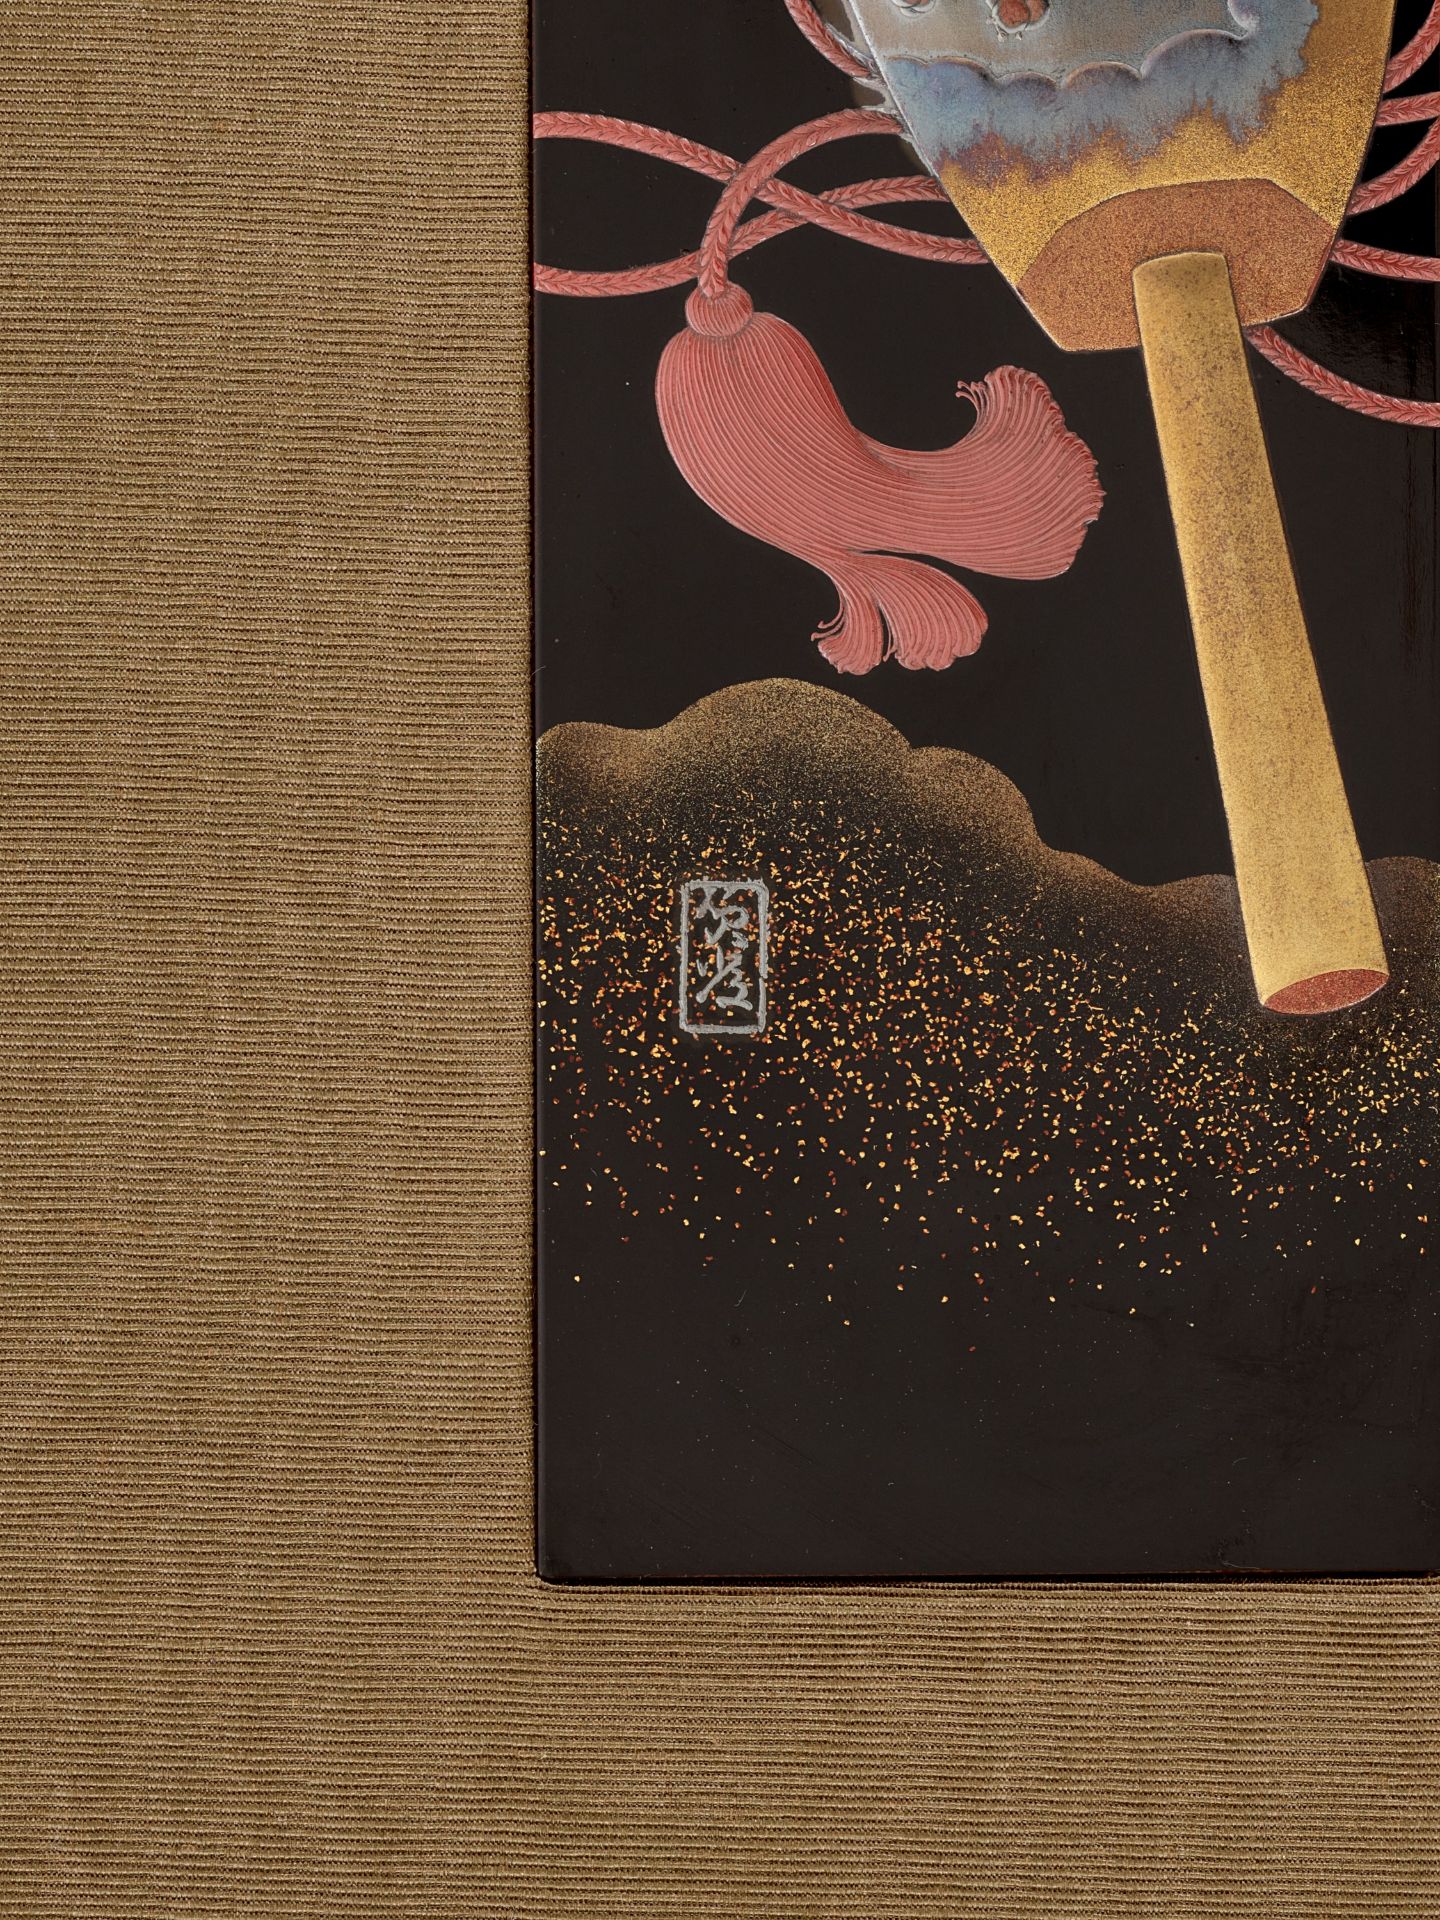 SADAATSU: A FINE ZESHIN-SCHOOL SET OF FIVE LACQUER TANZAKU (POEM CARDS) WITH FIVE FESTIVALS OF JAPAN - Image 15 of 15